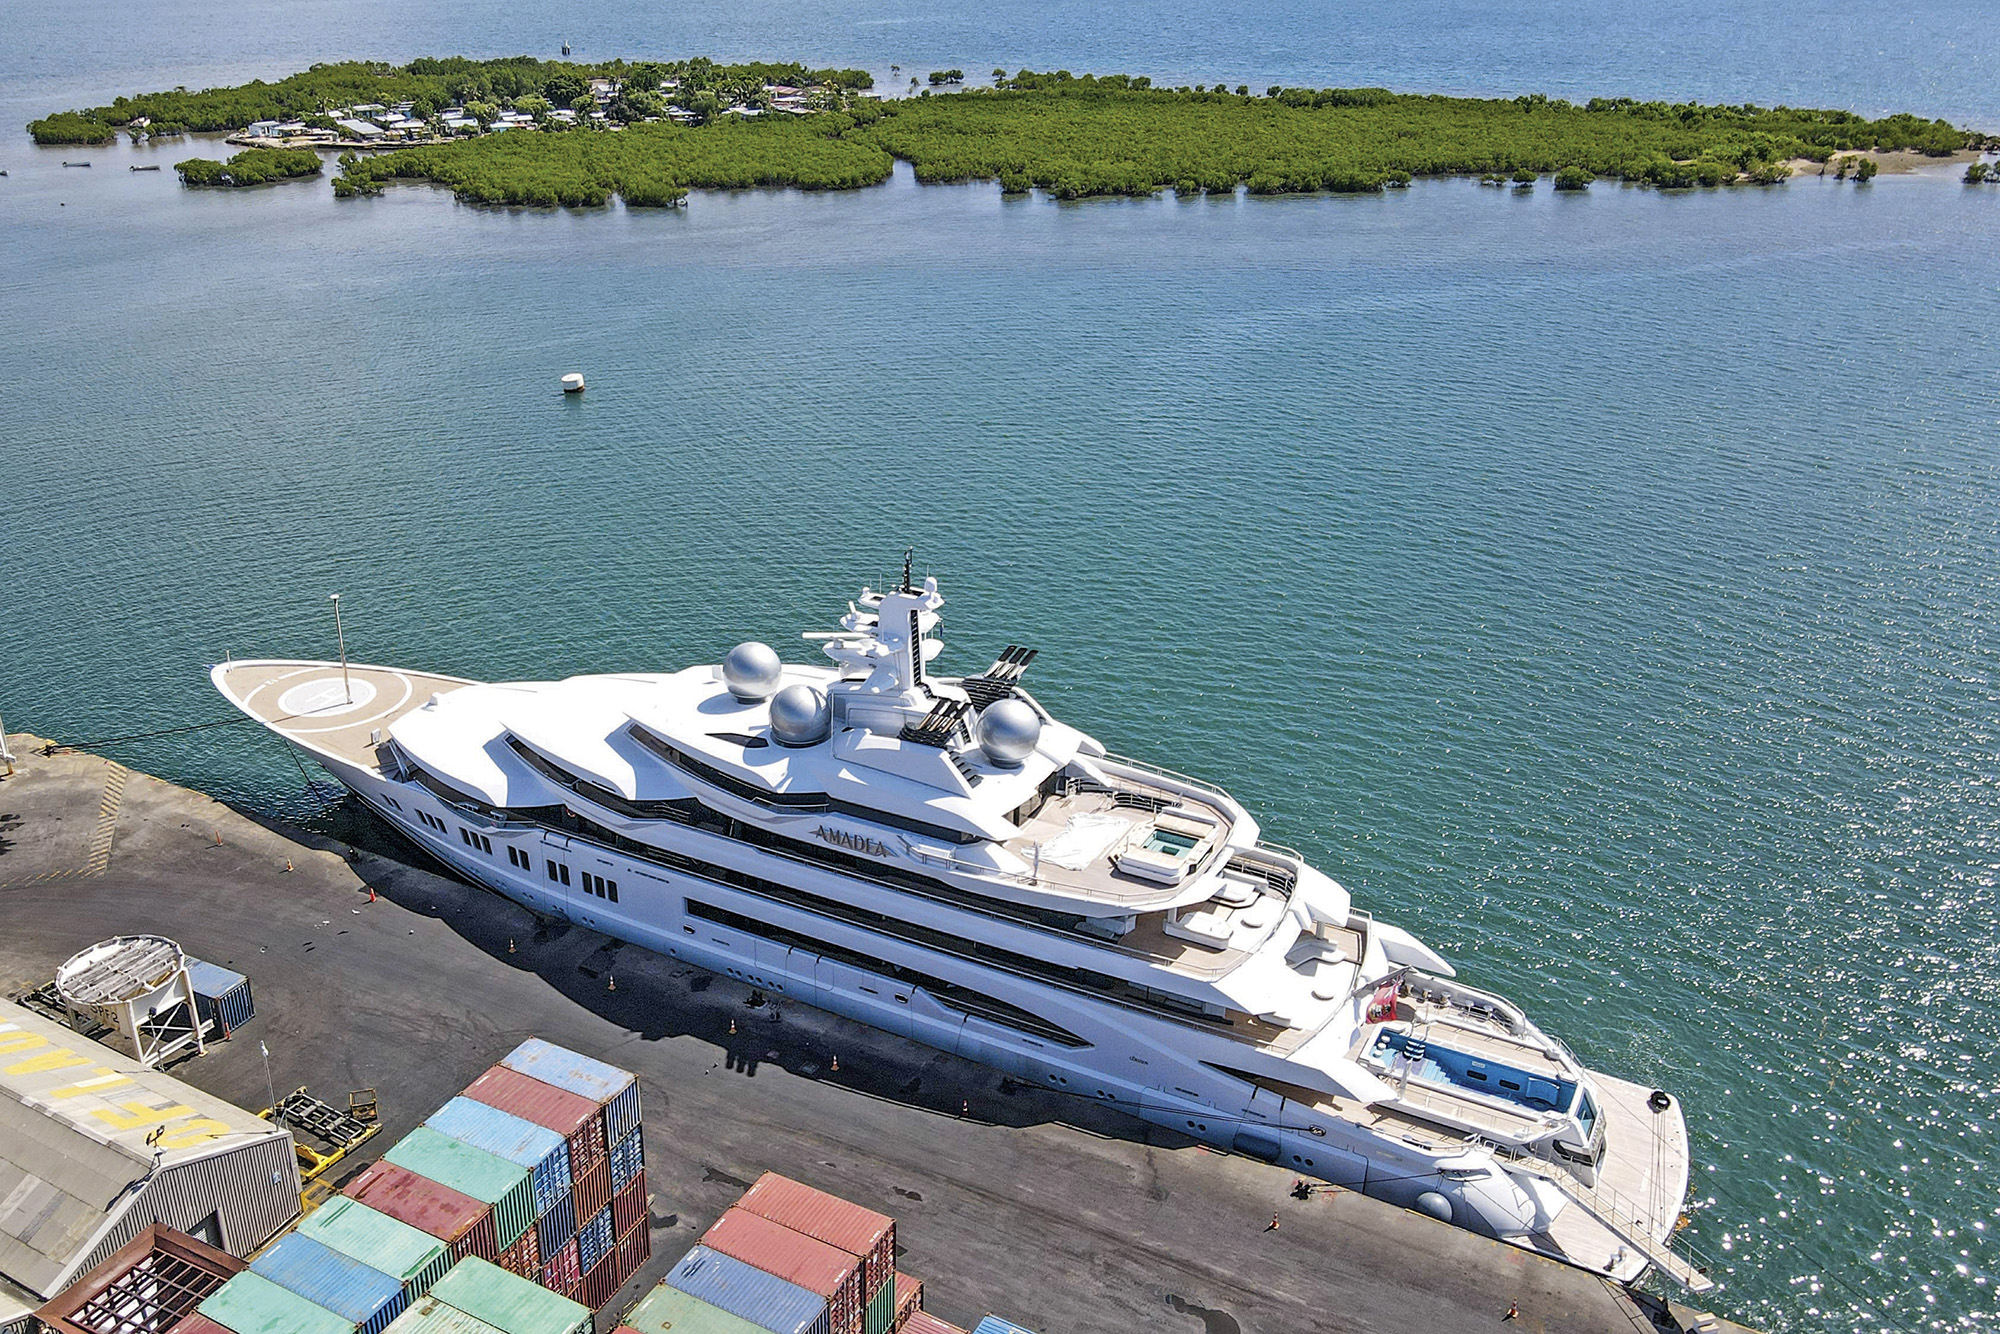 The super yacht Amadea is docked at the Queens Wharf in Lautoka, Fiji, on April 15.